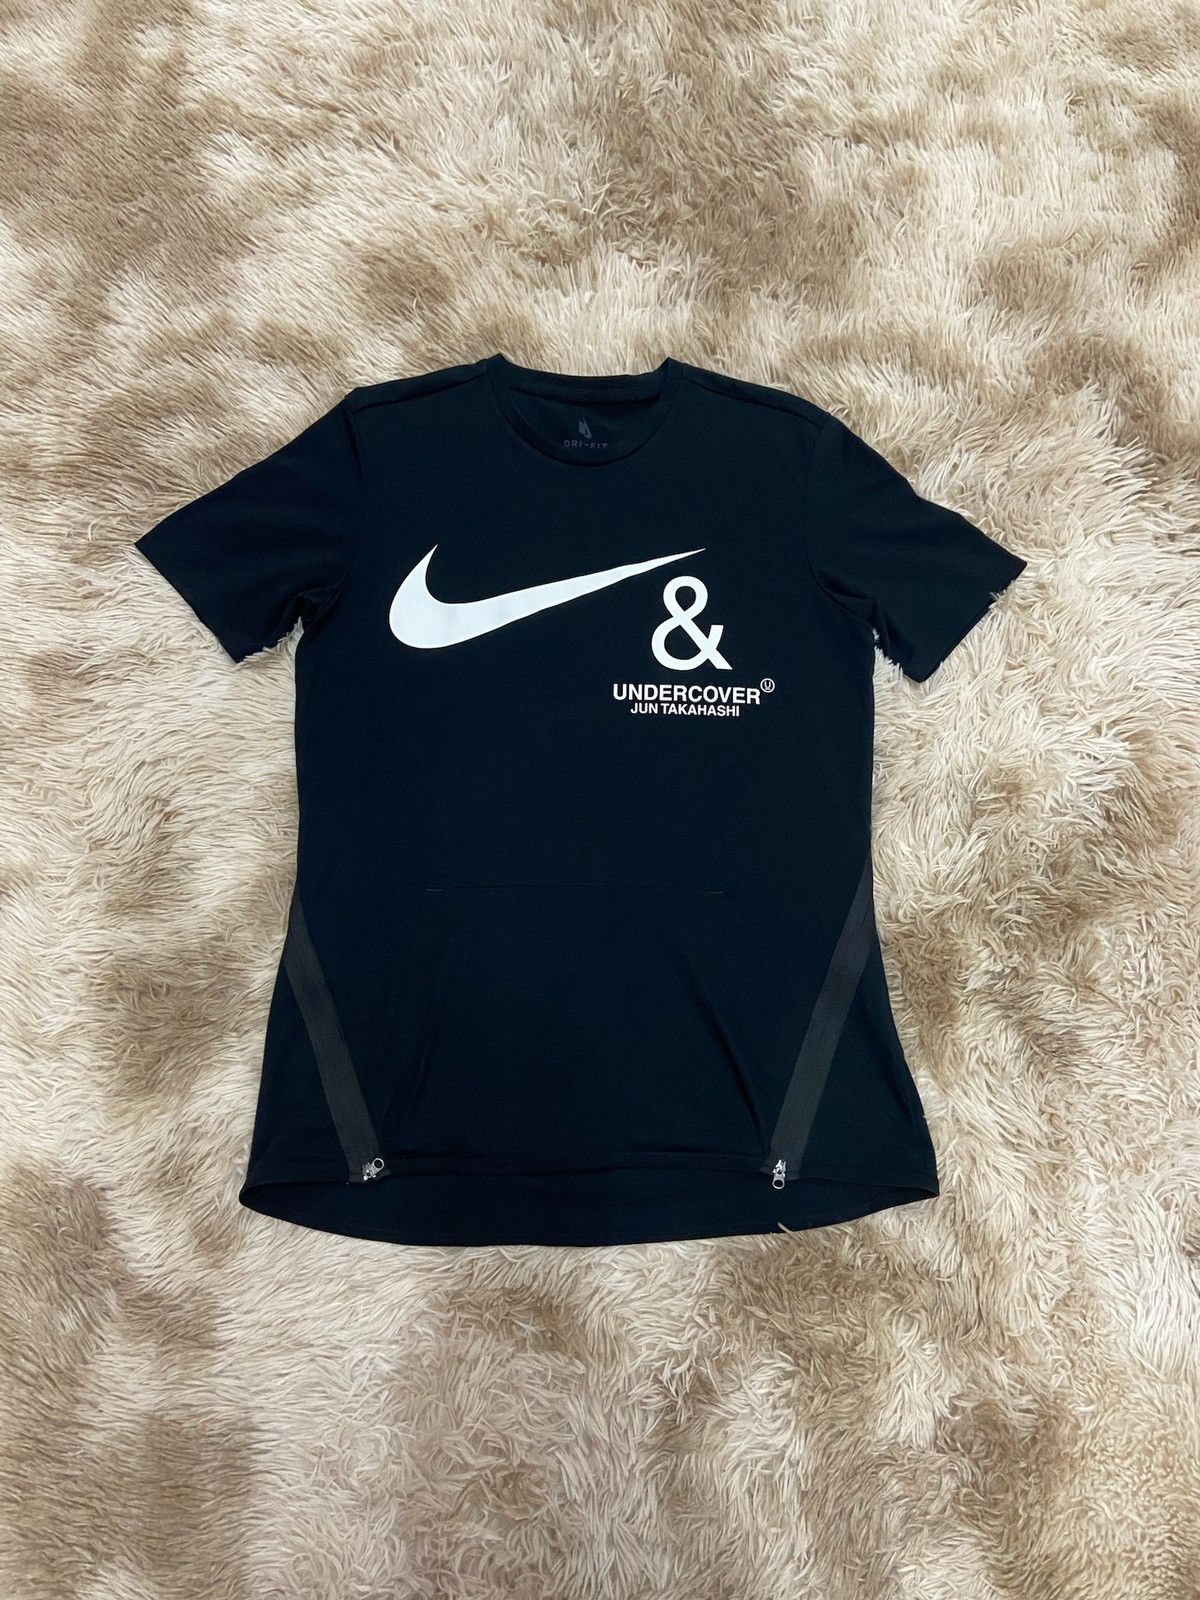 Undercover “Chaos/Balance” Dri-Fit Running Tee | Grailed